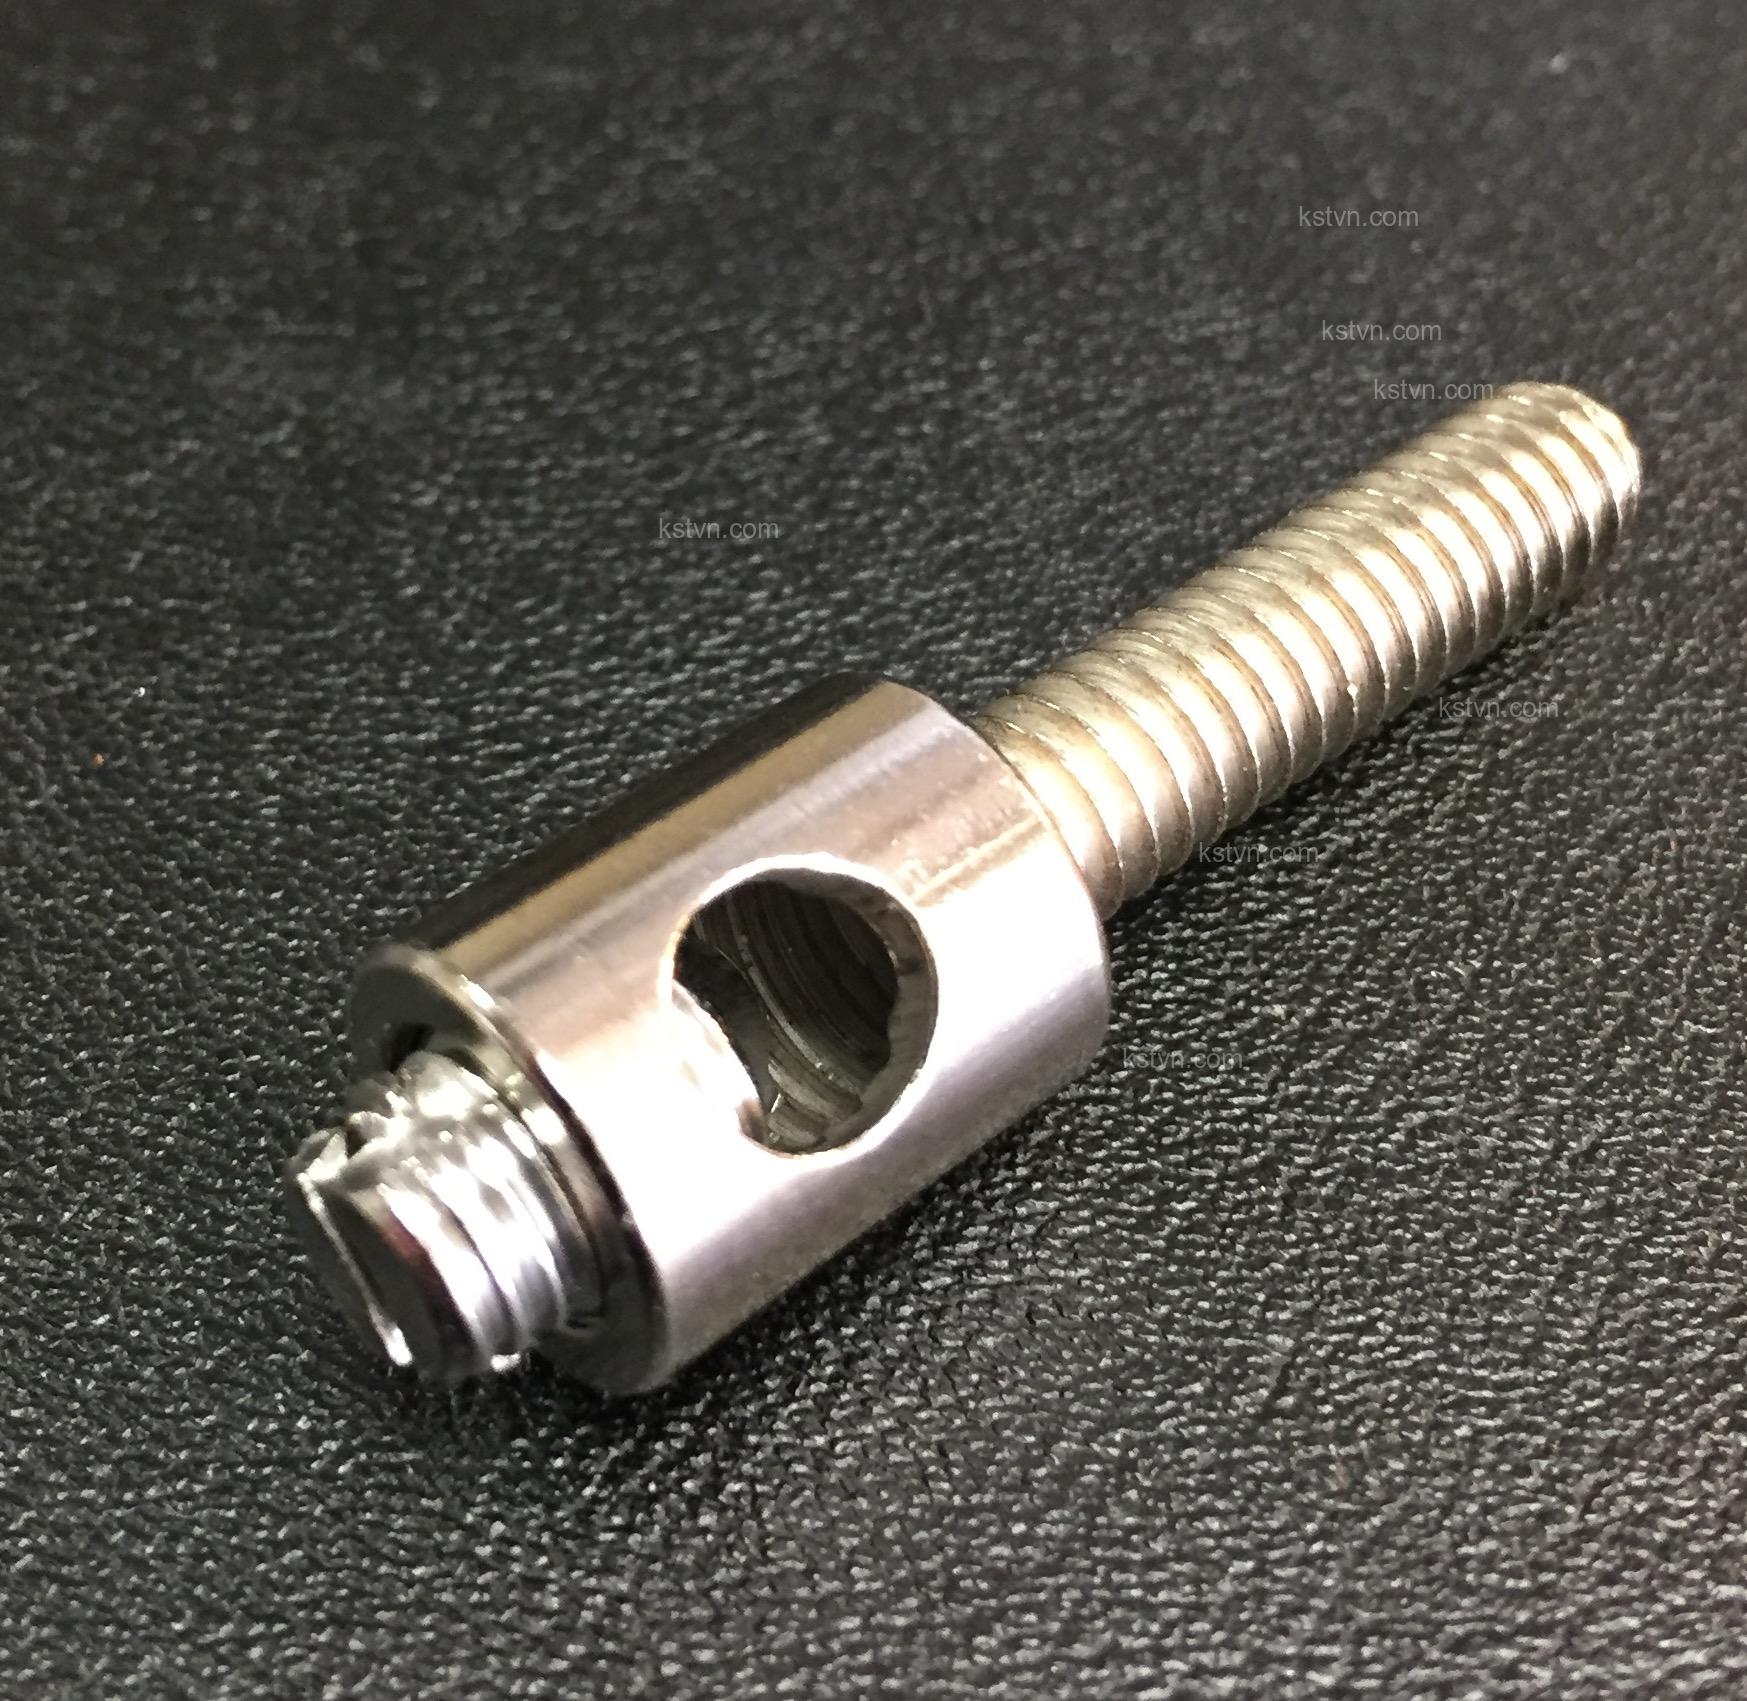 How to choose the right terminal lug for your project